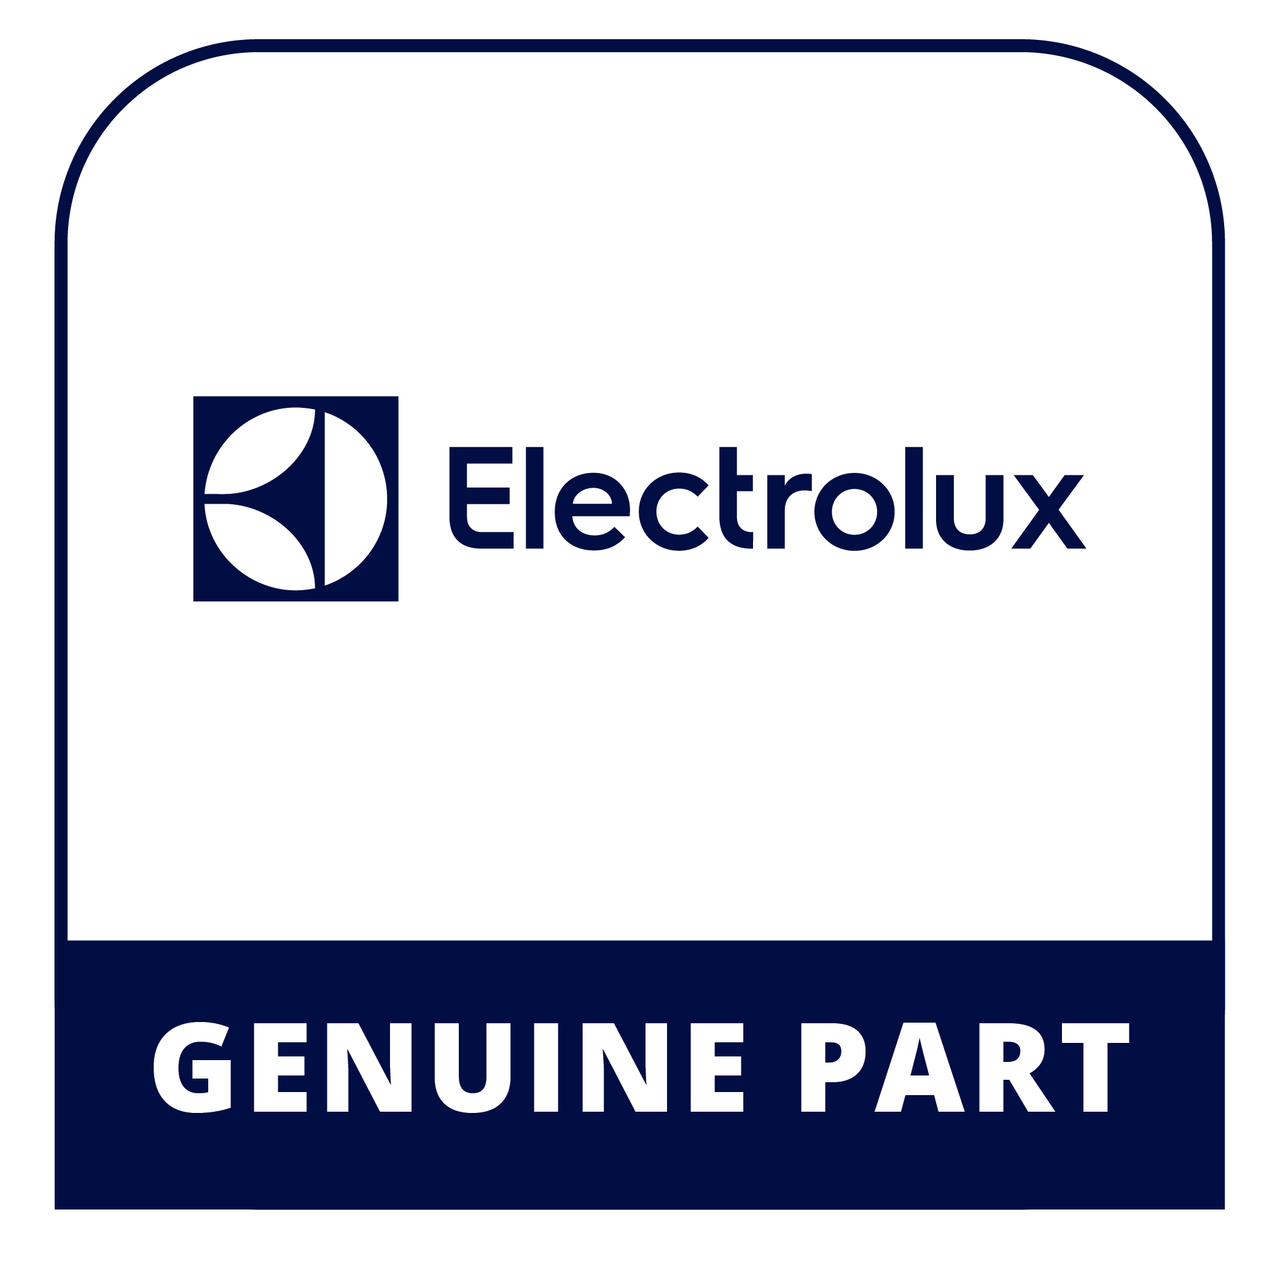 Frigidaire - Electrolux 318205339 Owners Manual - Genuine Electrolux Part